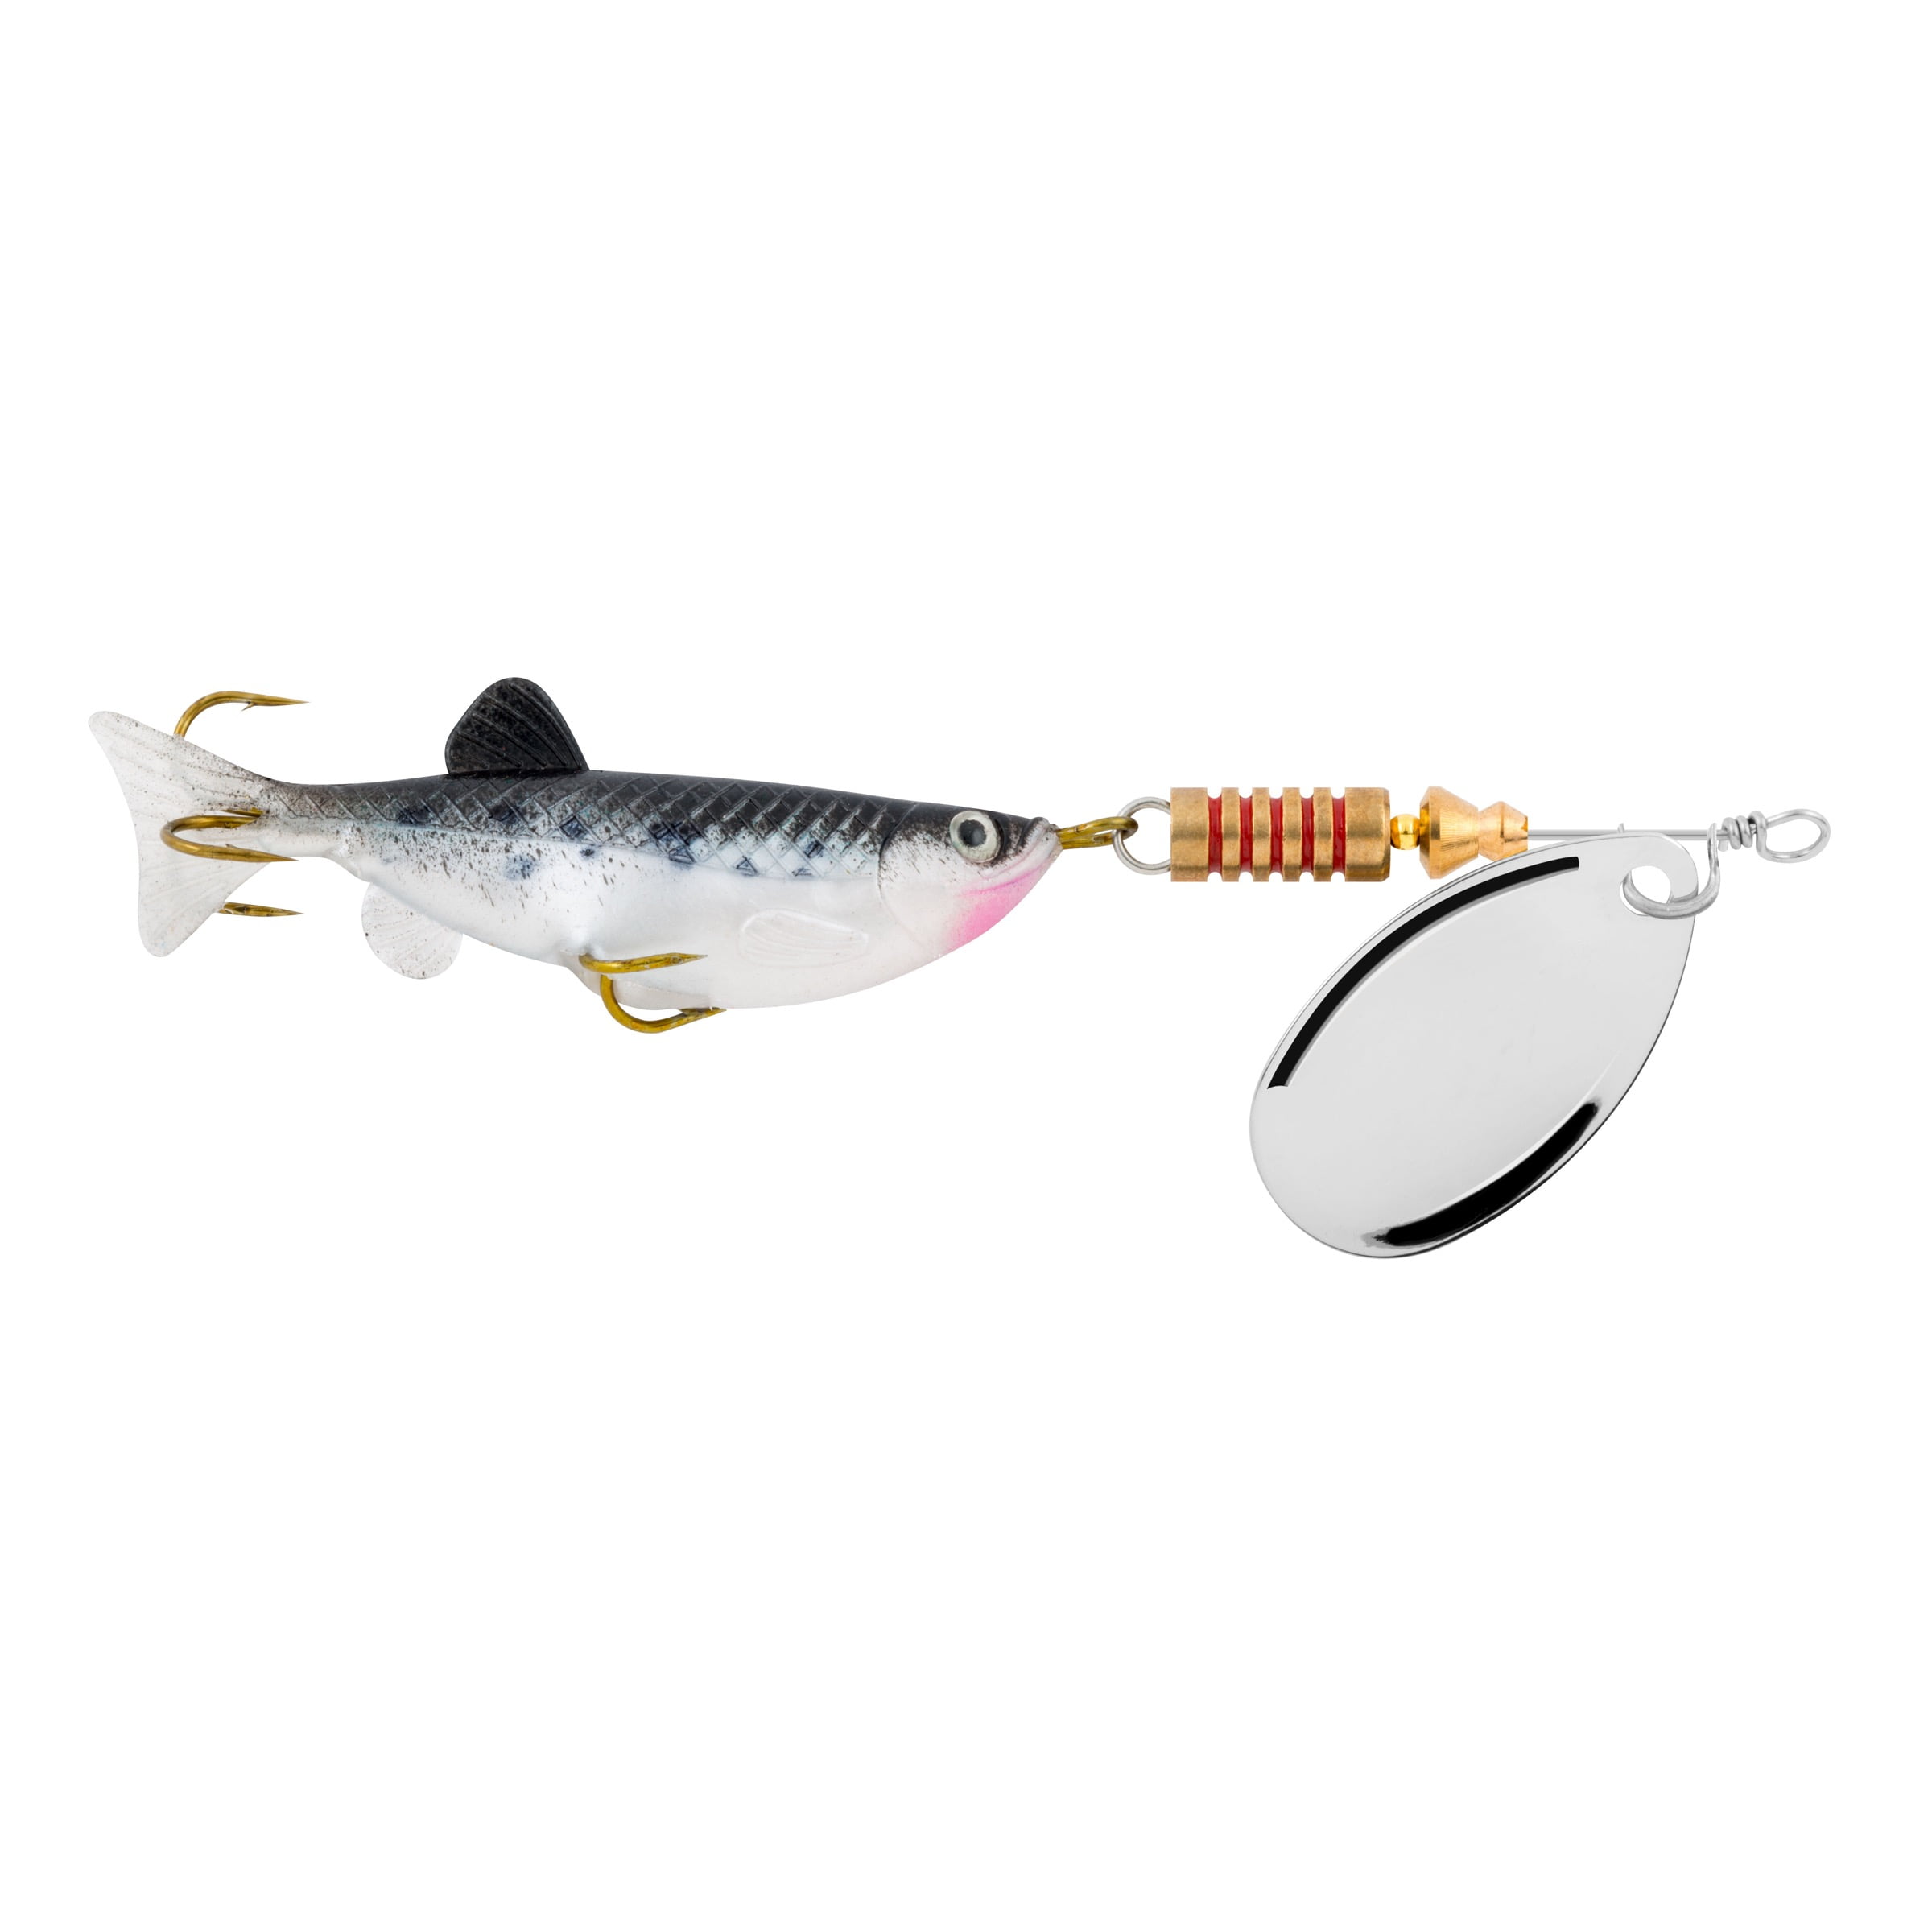 South Bend Minnow Spinner 5/16 ounce Silver #3, Spinnerbaits